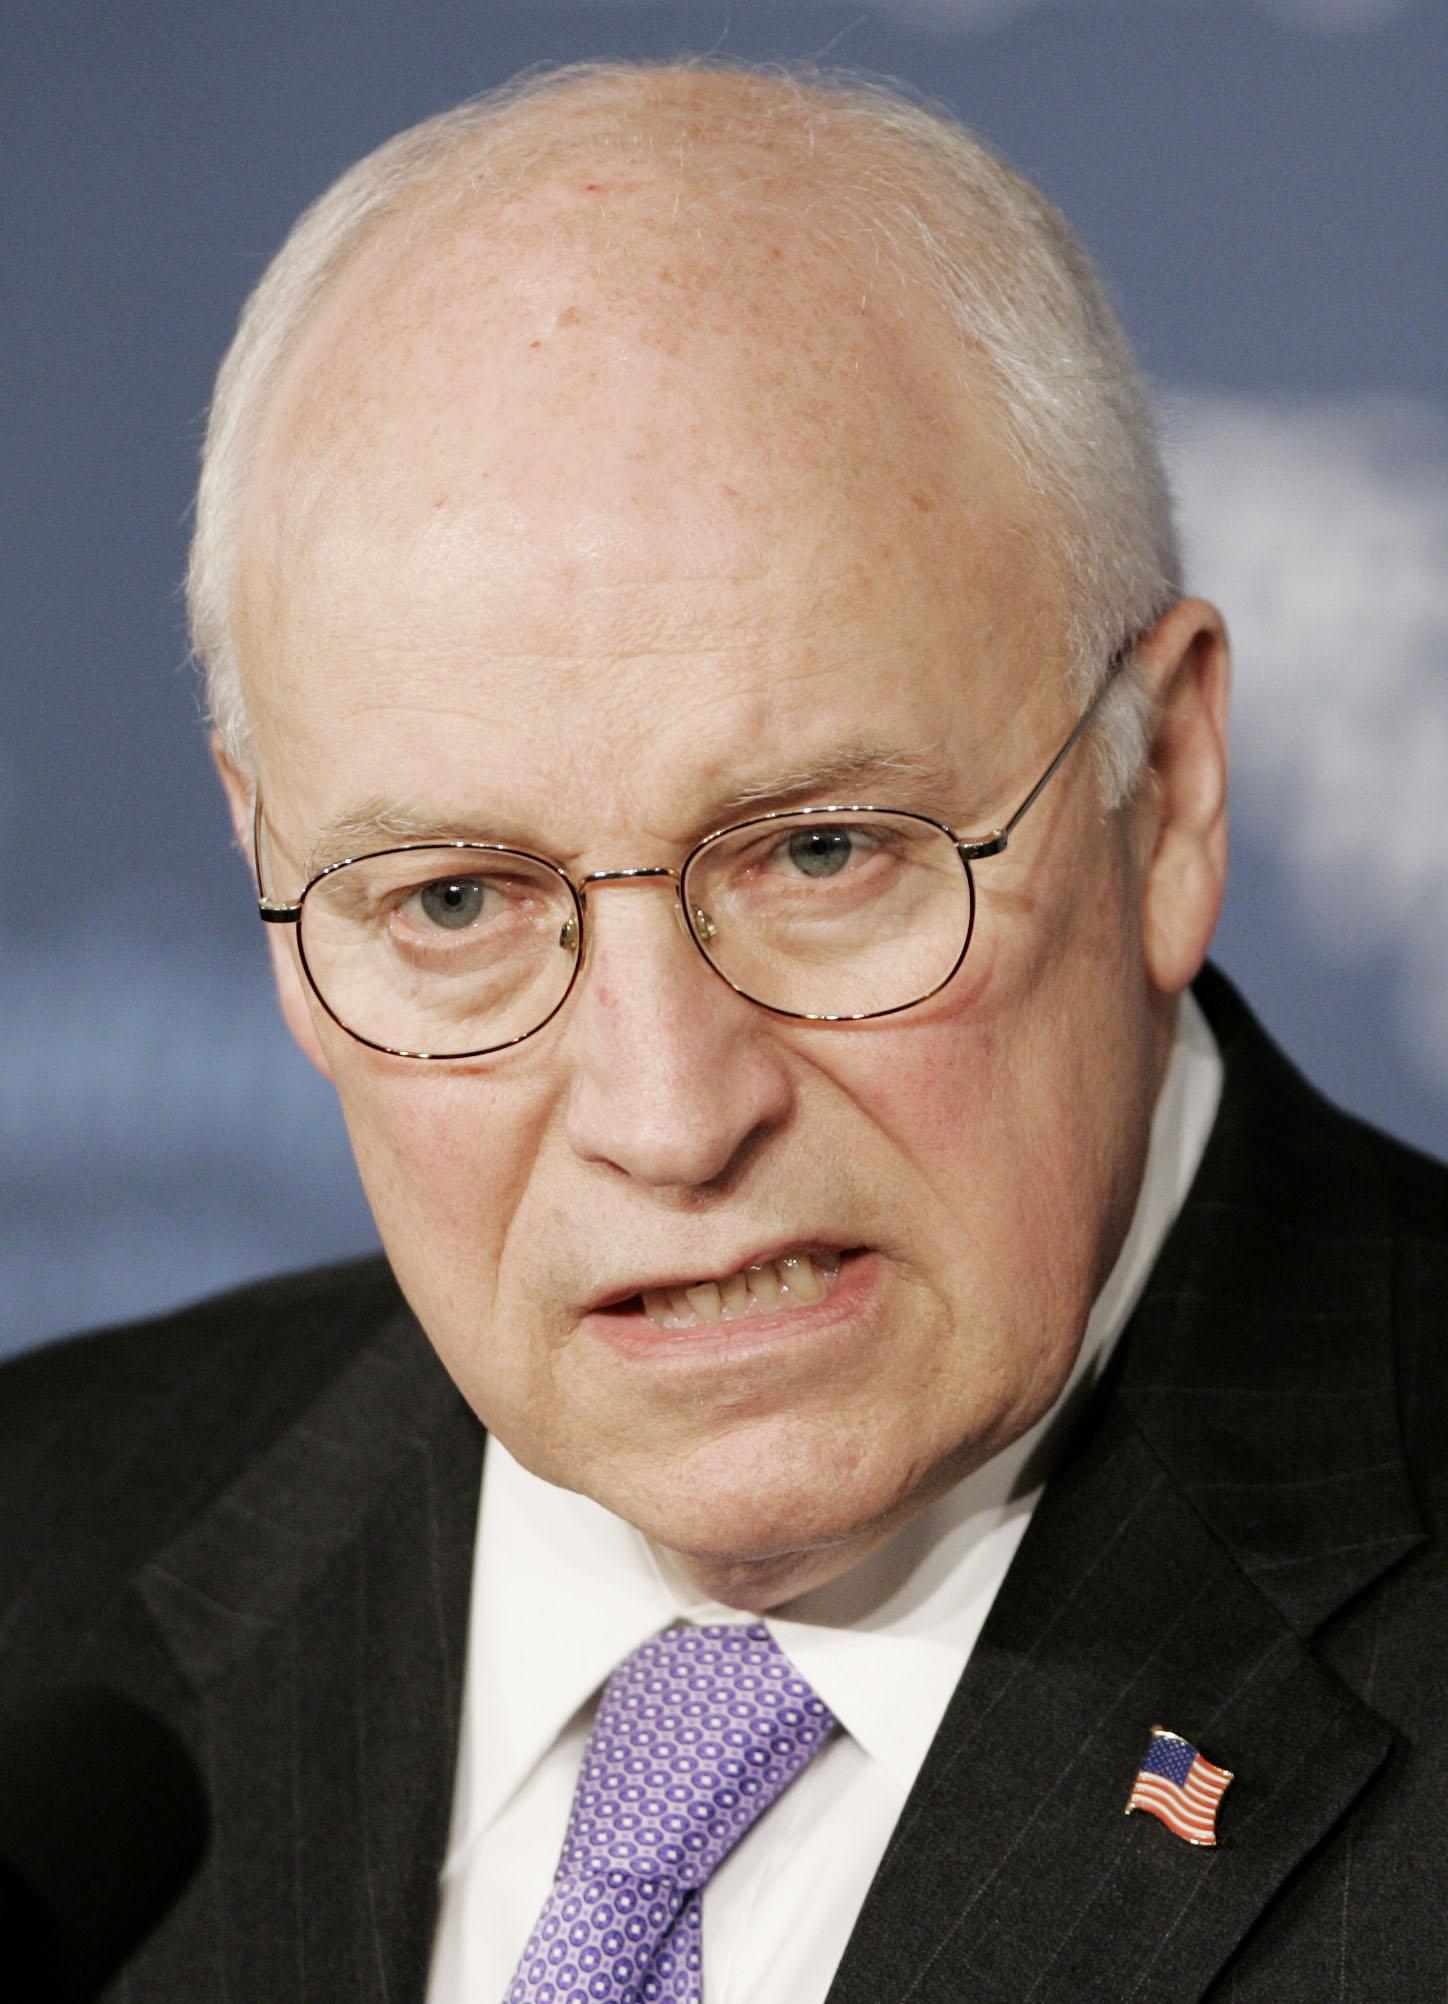 Dick cheney deleted email